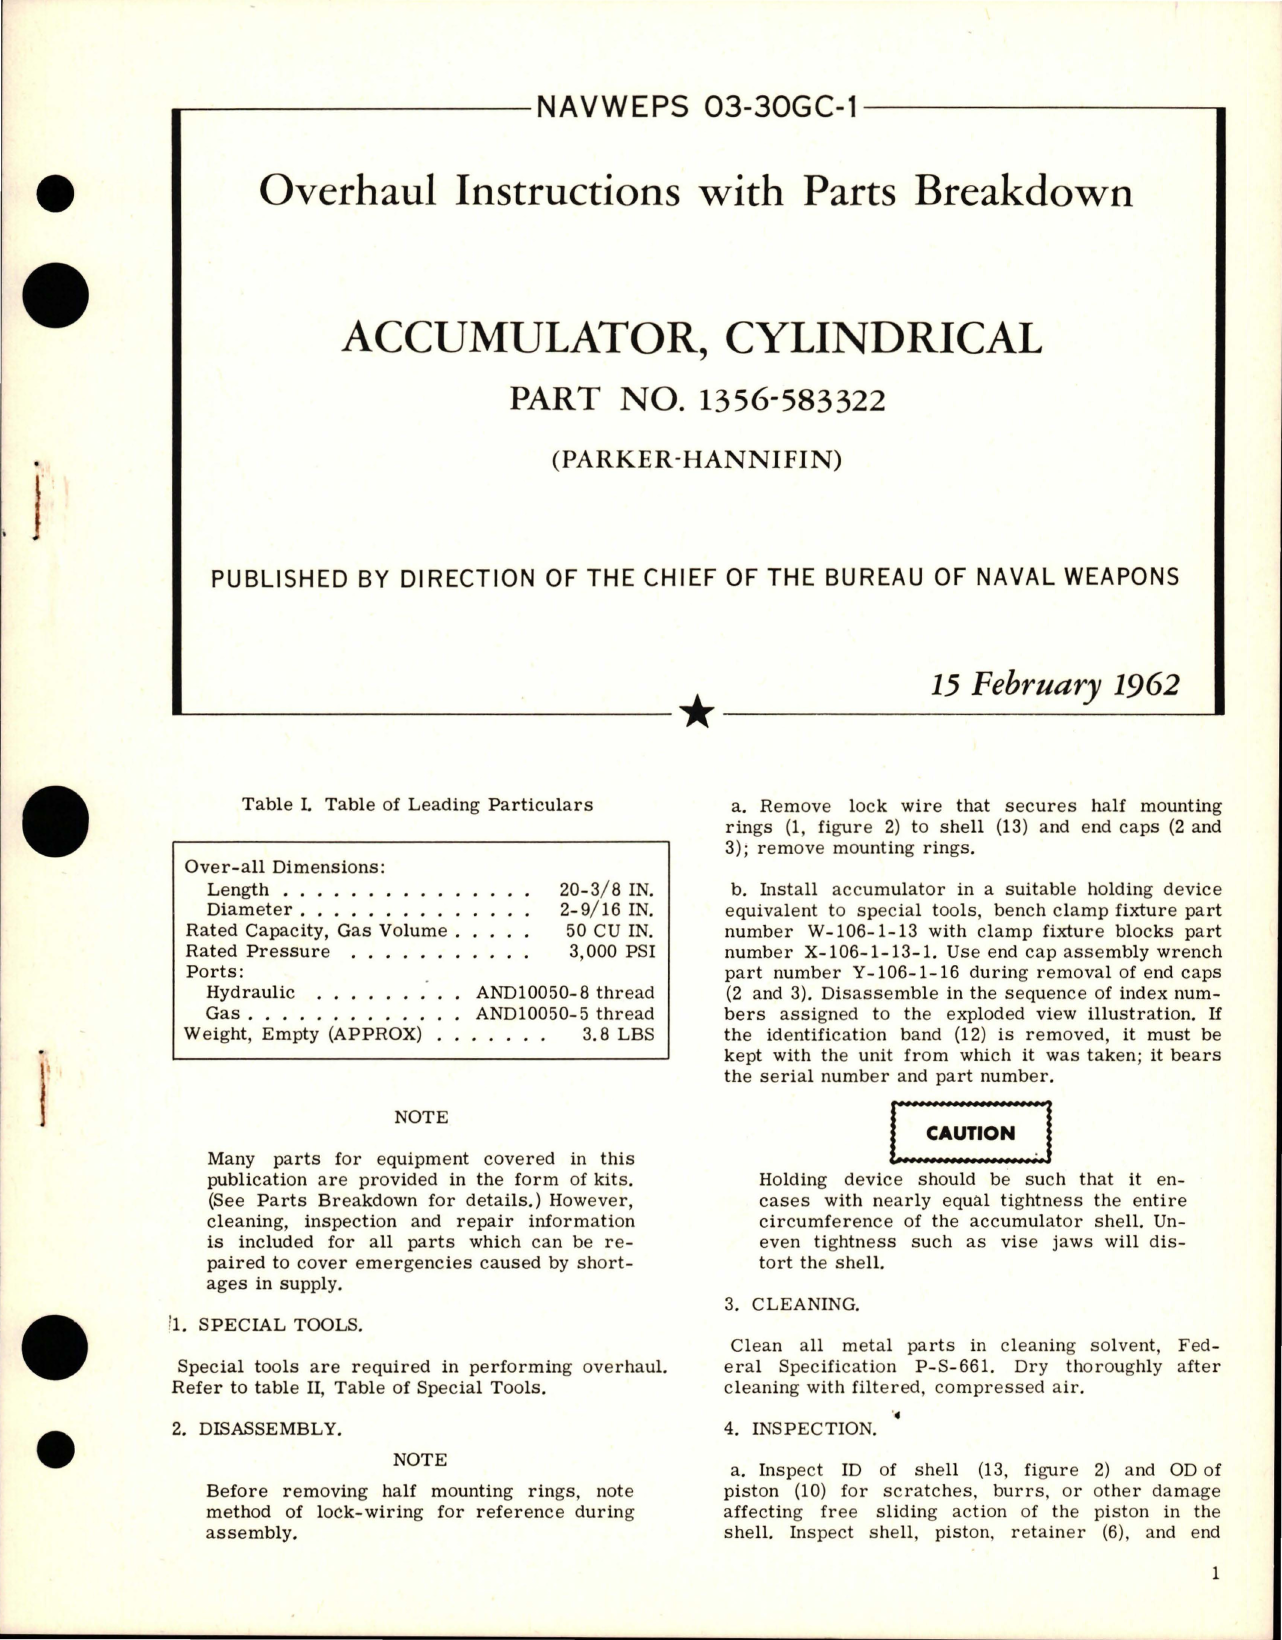 Sample page 1 from AirCorps Library document: Overhaul Instructions with Parts Breakdown for Cylindrical Accumulator - Part 1356-583322 